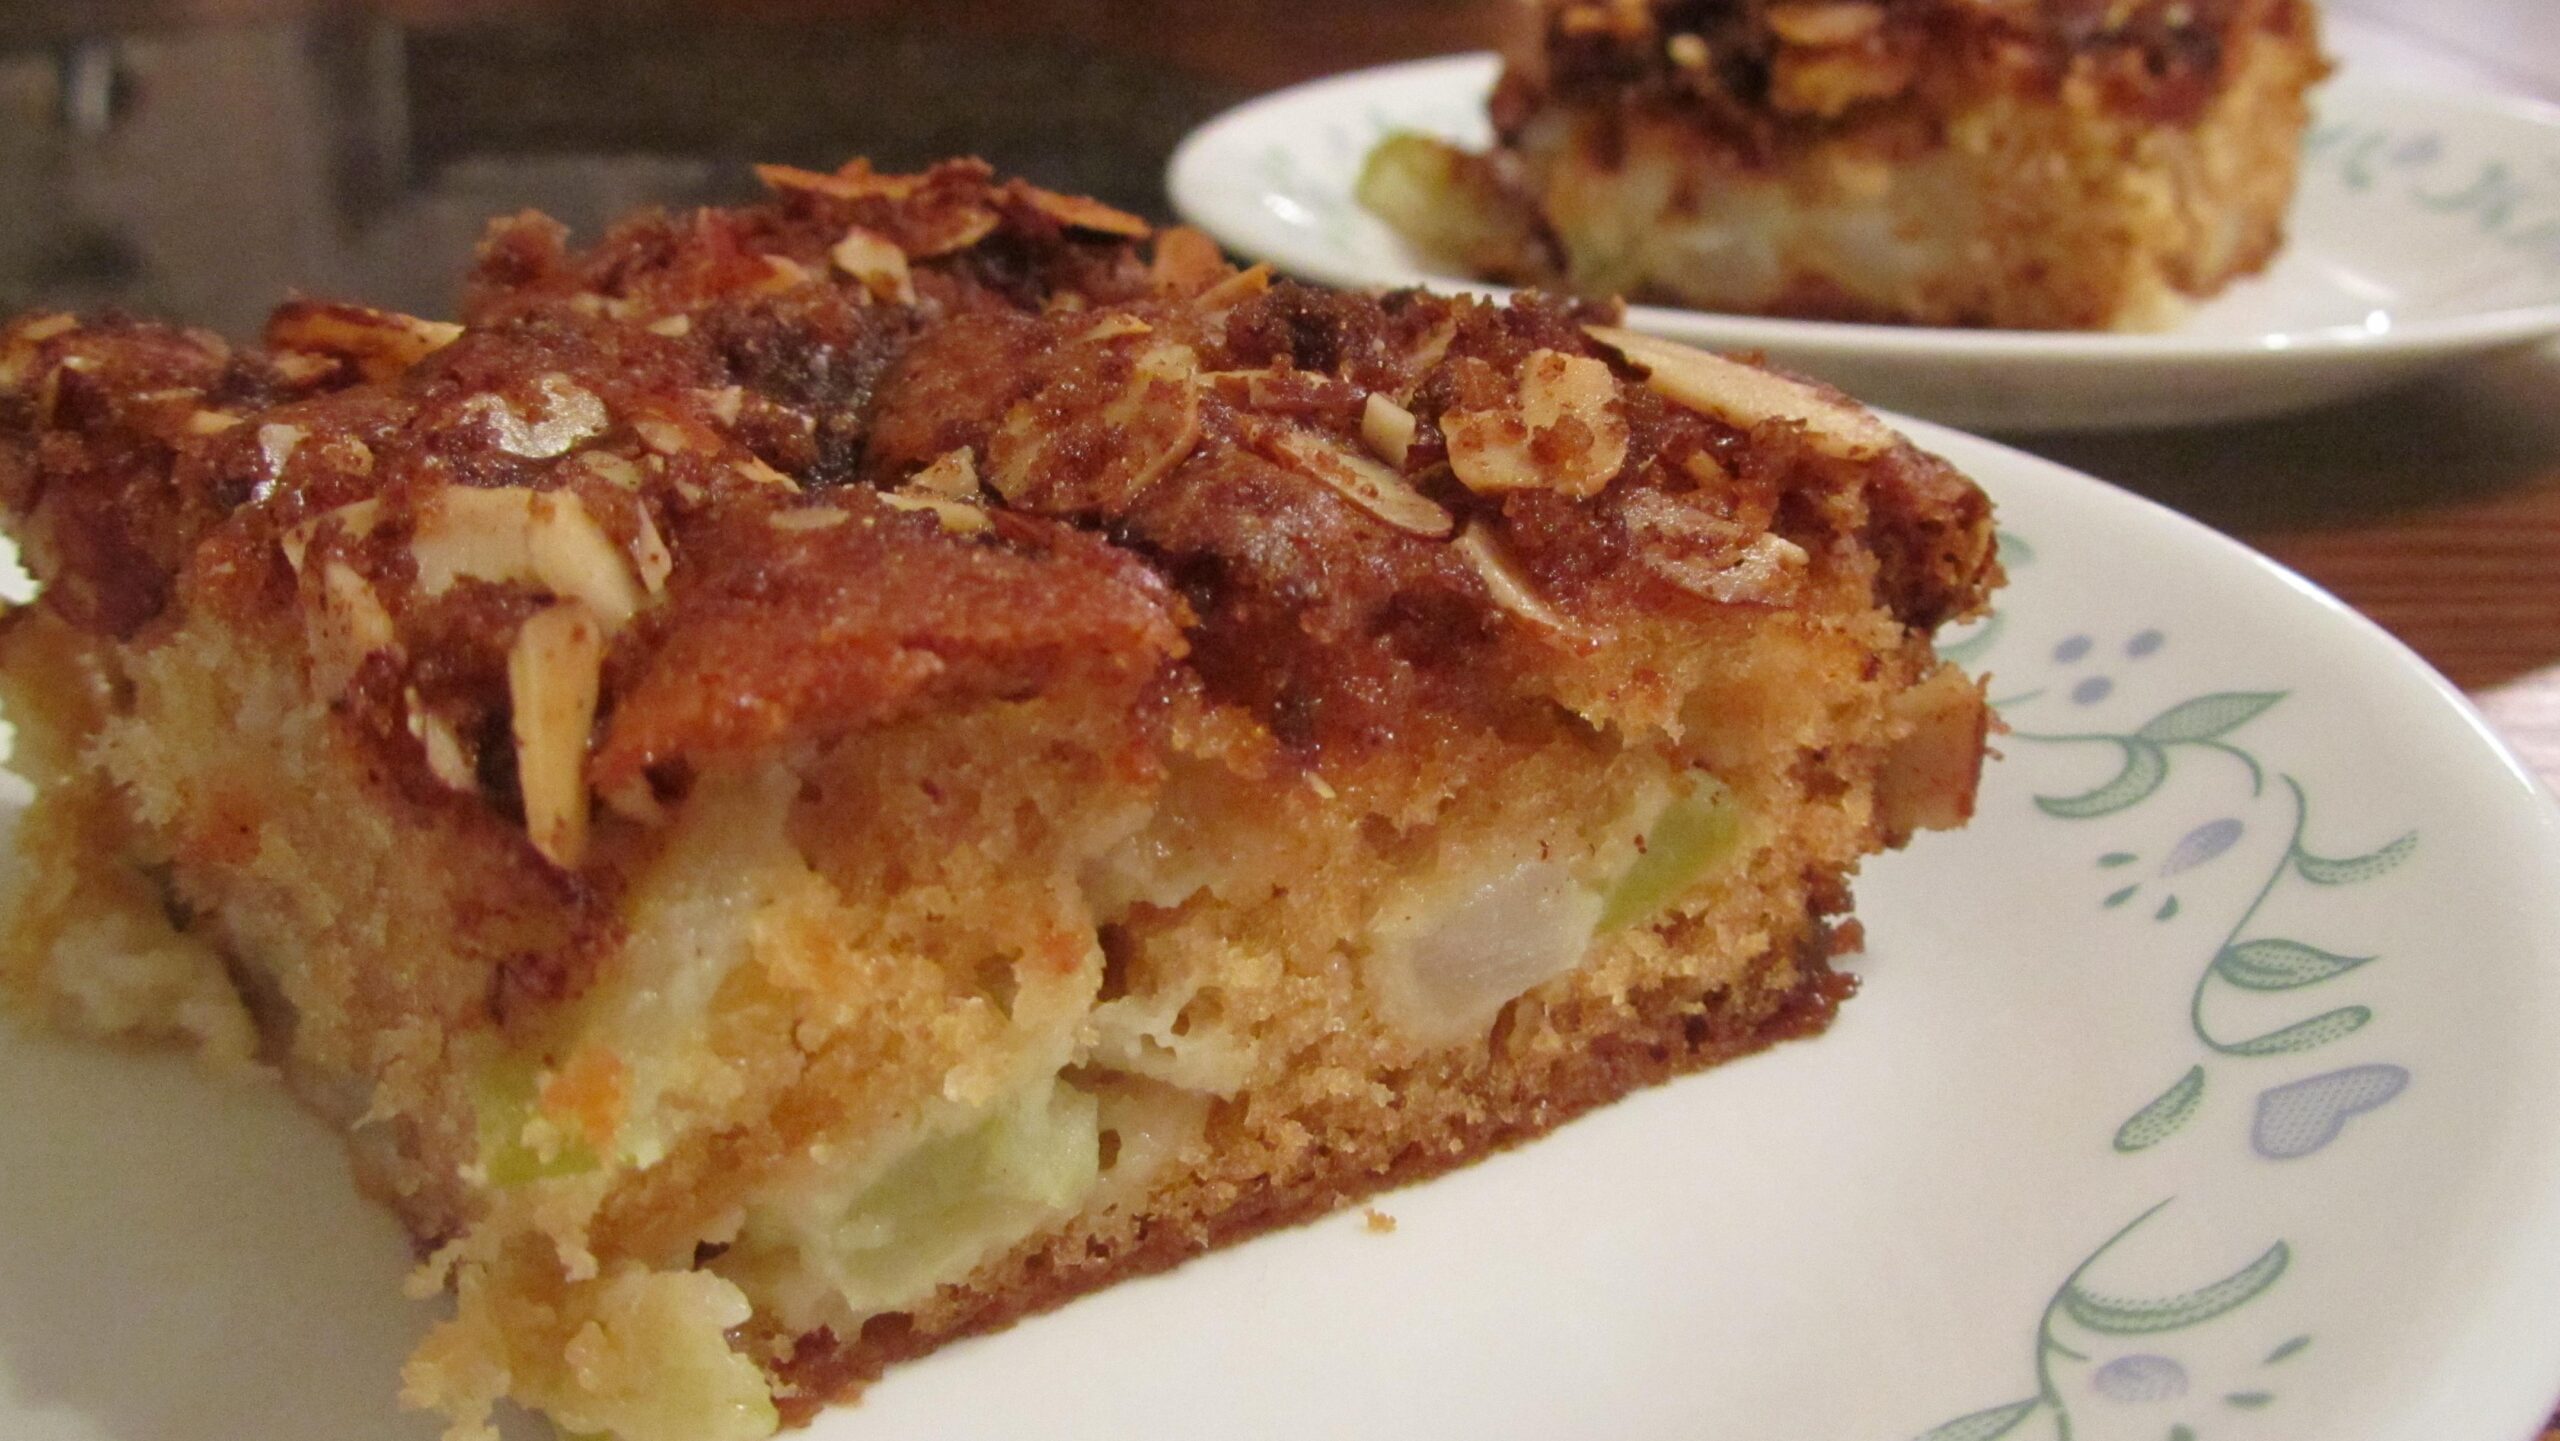 Delectable Apple-Pear Coffee Cake Recipe to Indulge In